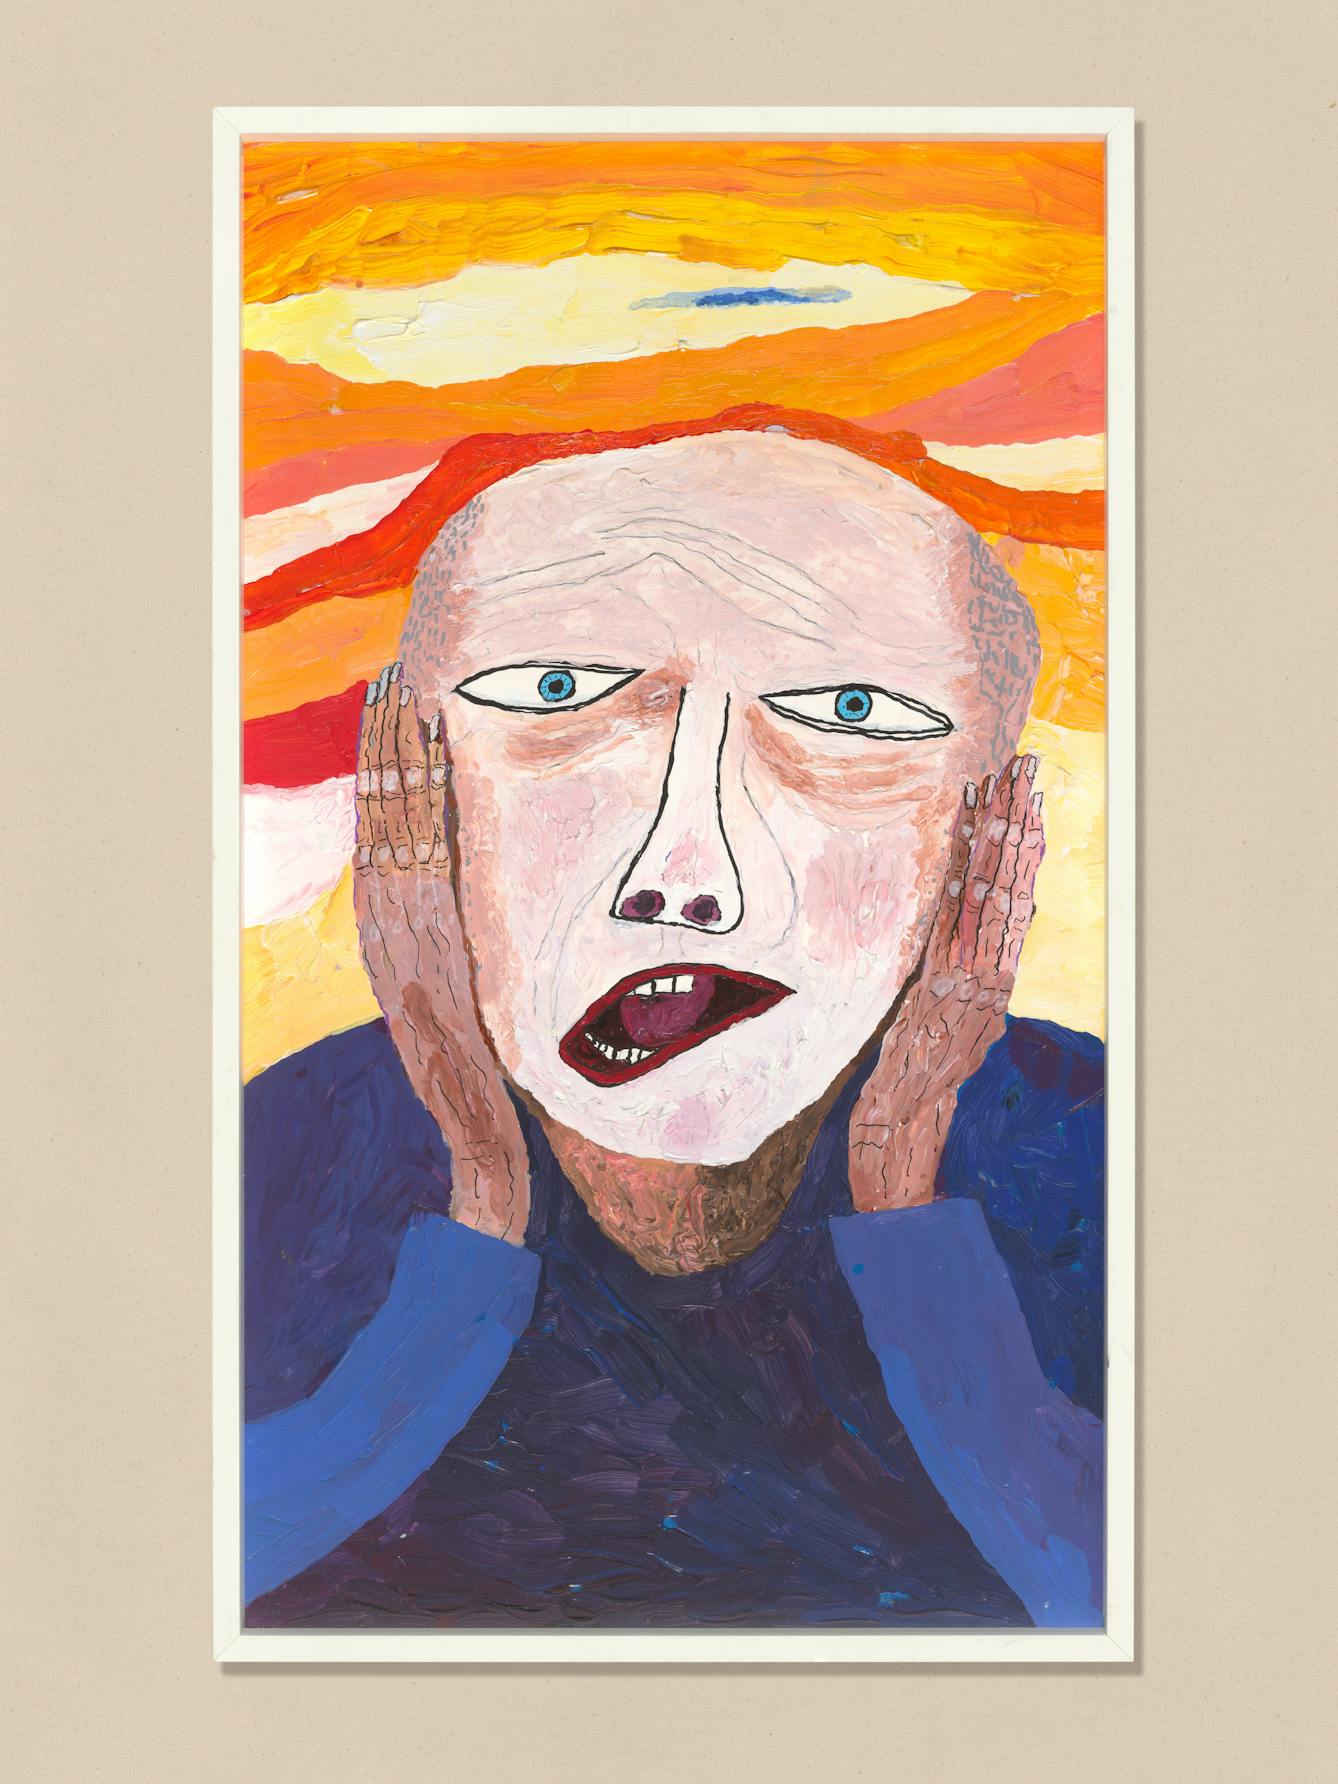 Acrylic on canvas artwork by Chris Miller titled ‘My Scream’. In the artwork, a man is holding is head with both his hands and appears to be screaming.  The man and surrounding landscape are visibly distorted.